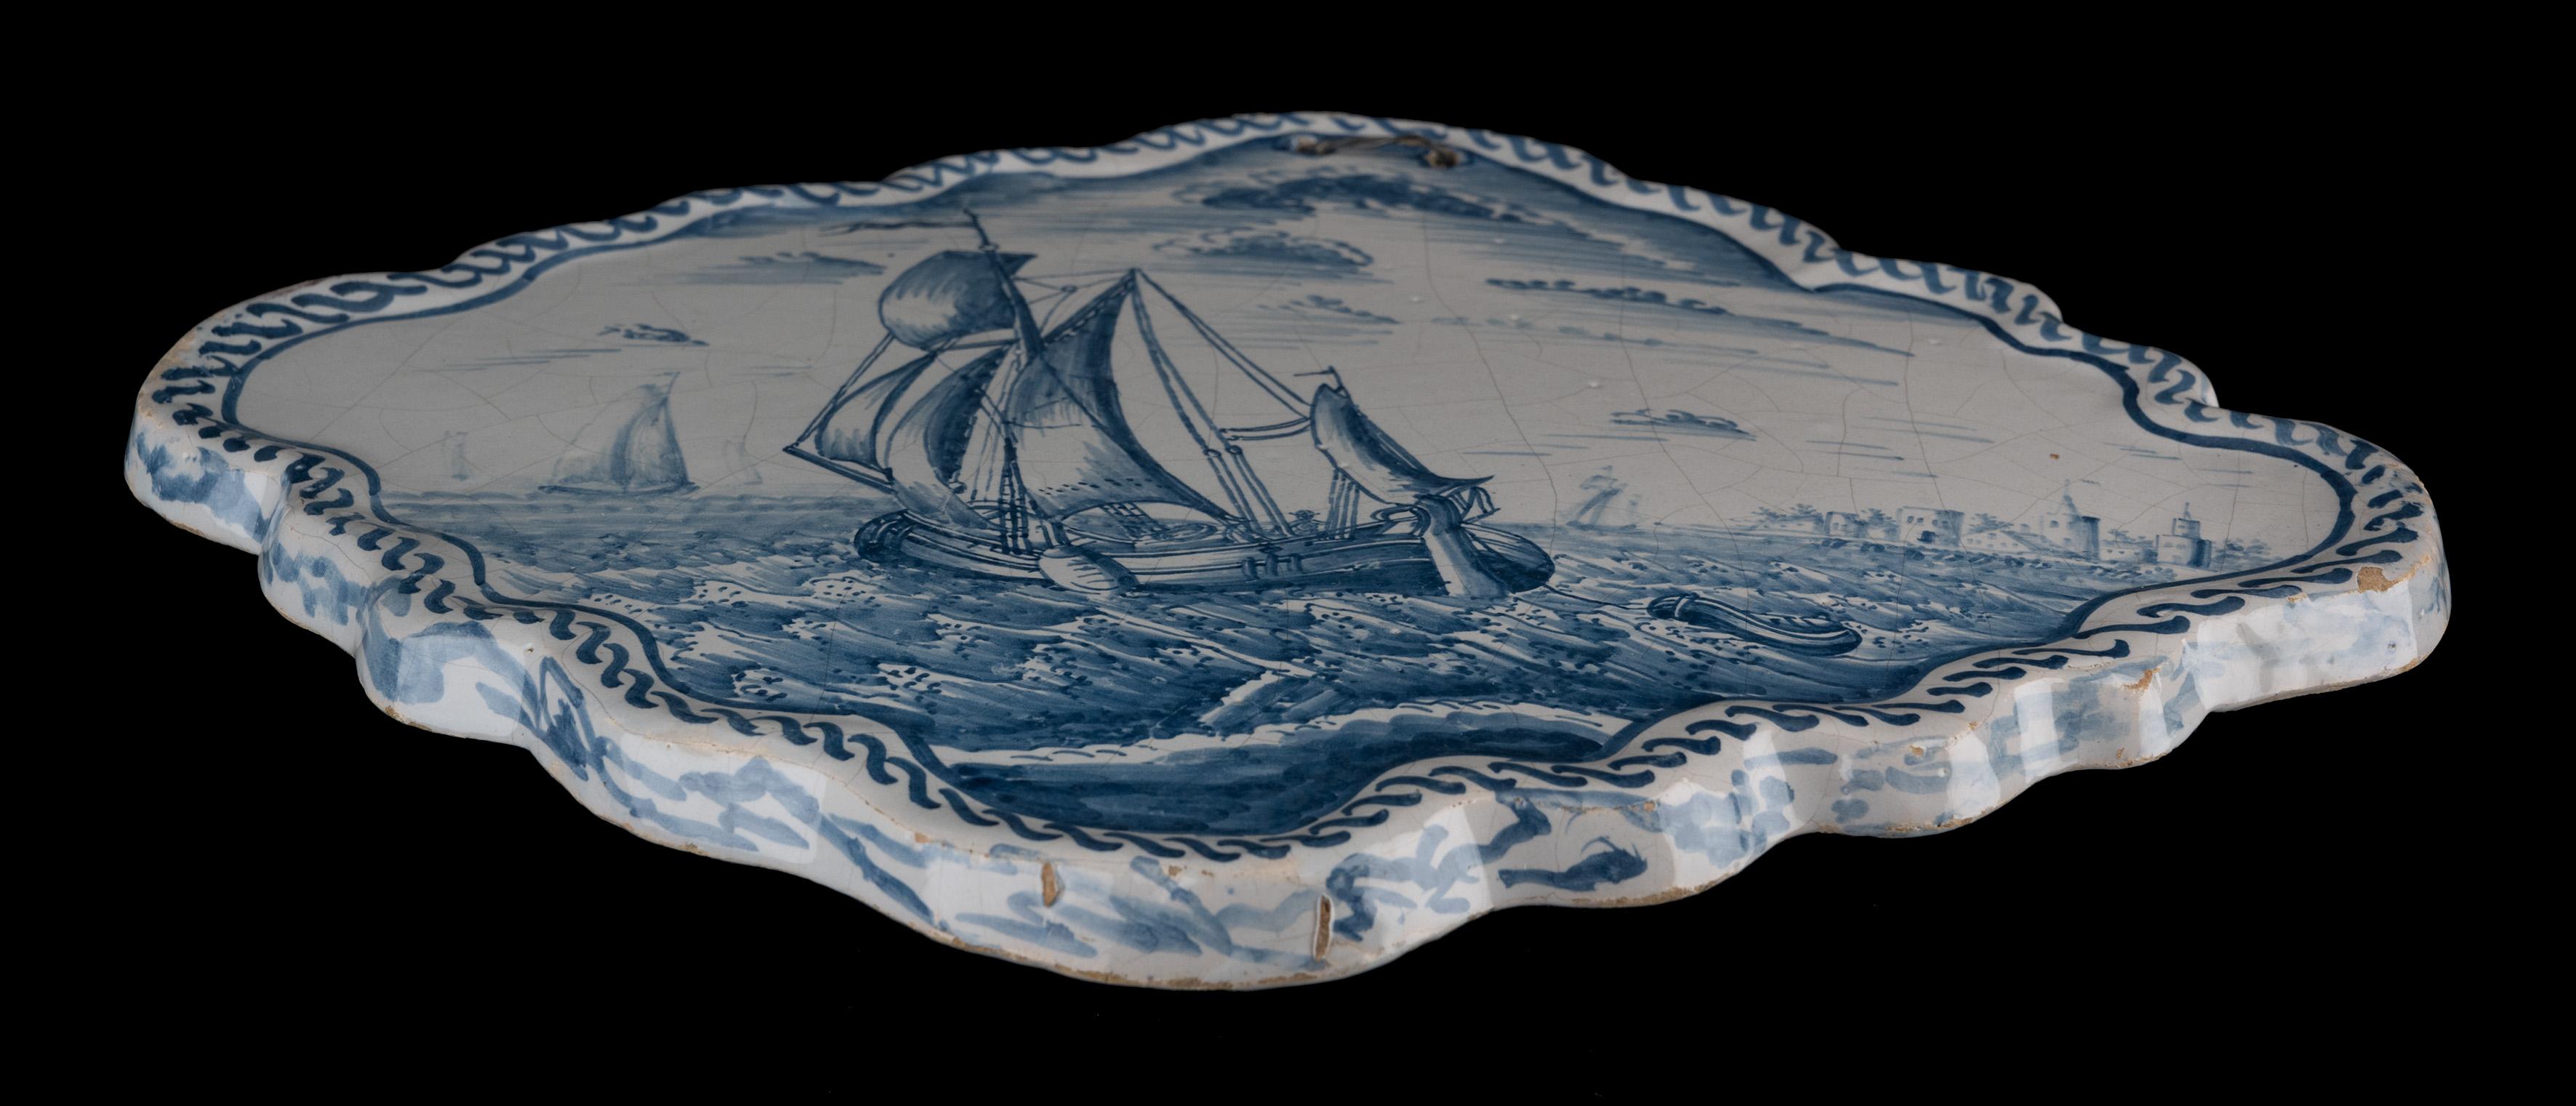 Pair of Blue and White Plaques with Ships off the Coast, 1784-1800 For Sale 2